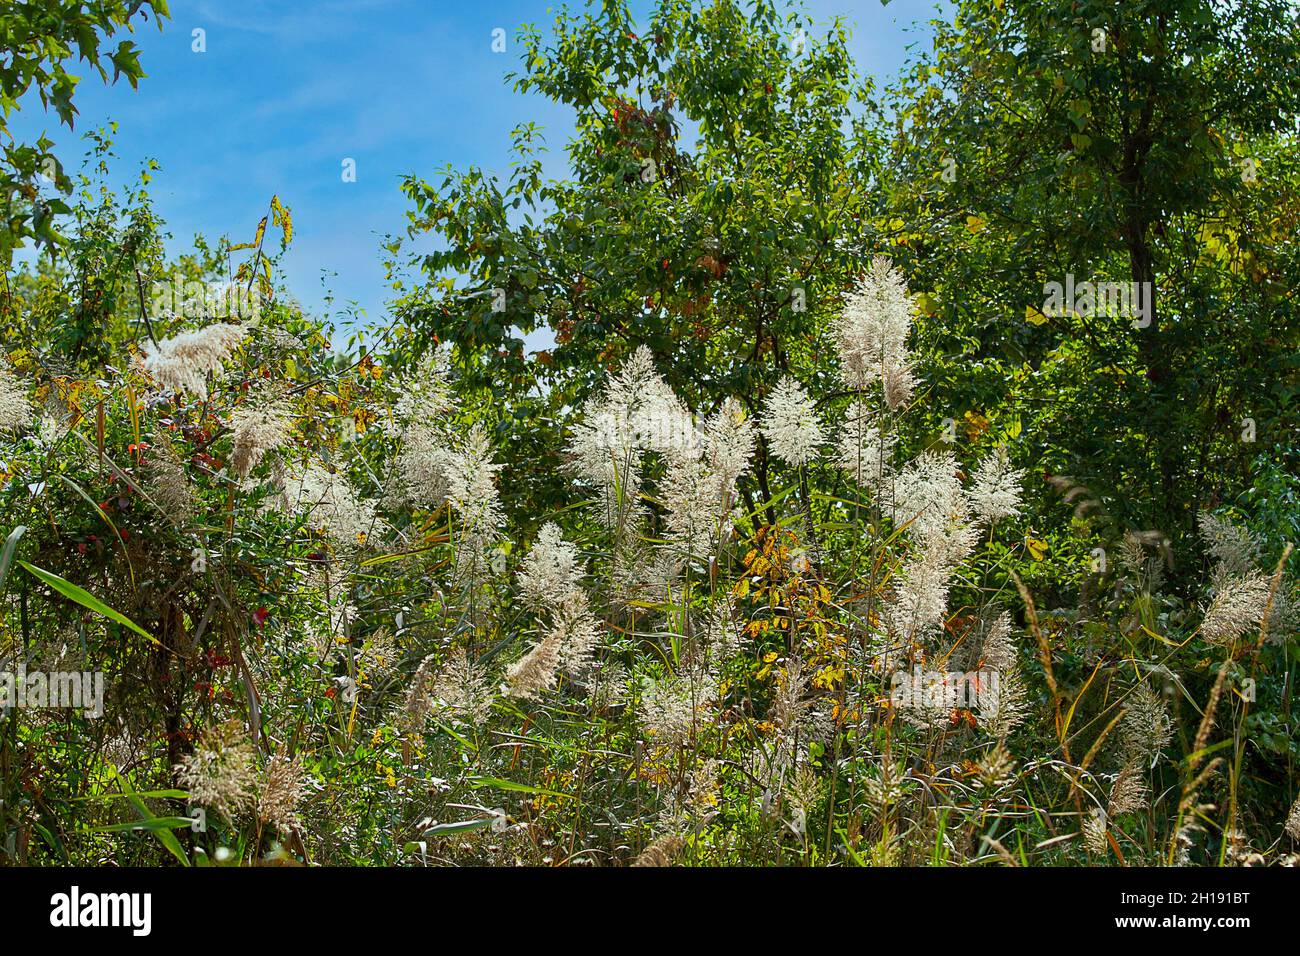 Scenic views of nature in a national refuge and wetlands Stock Photo